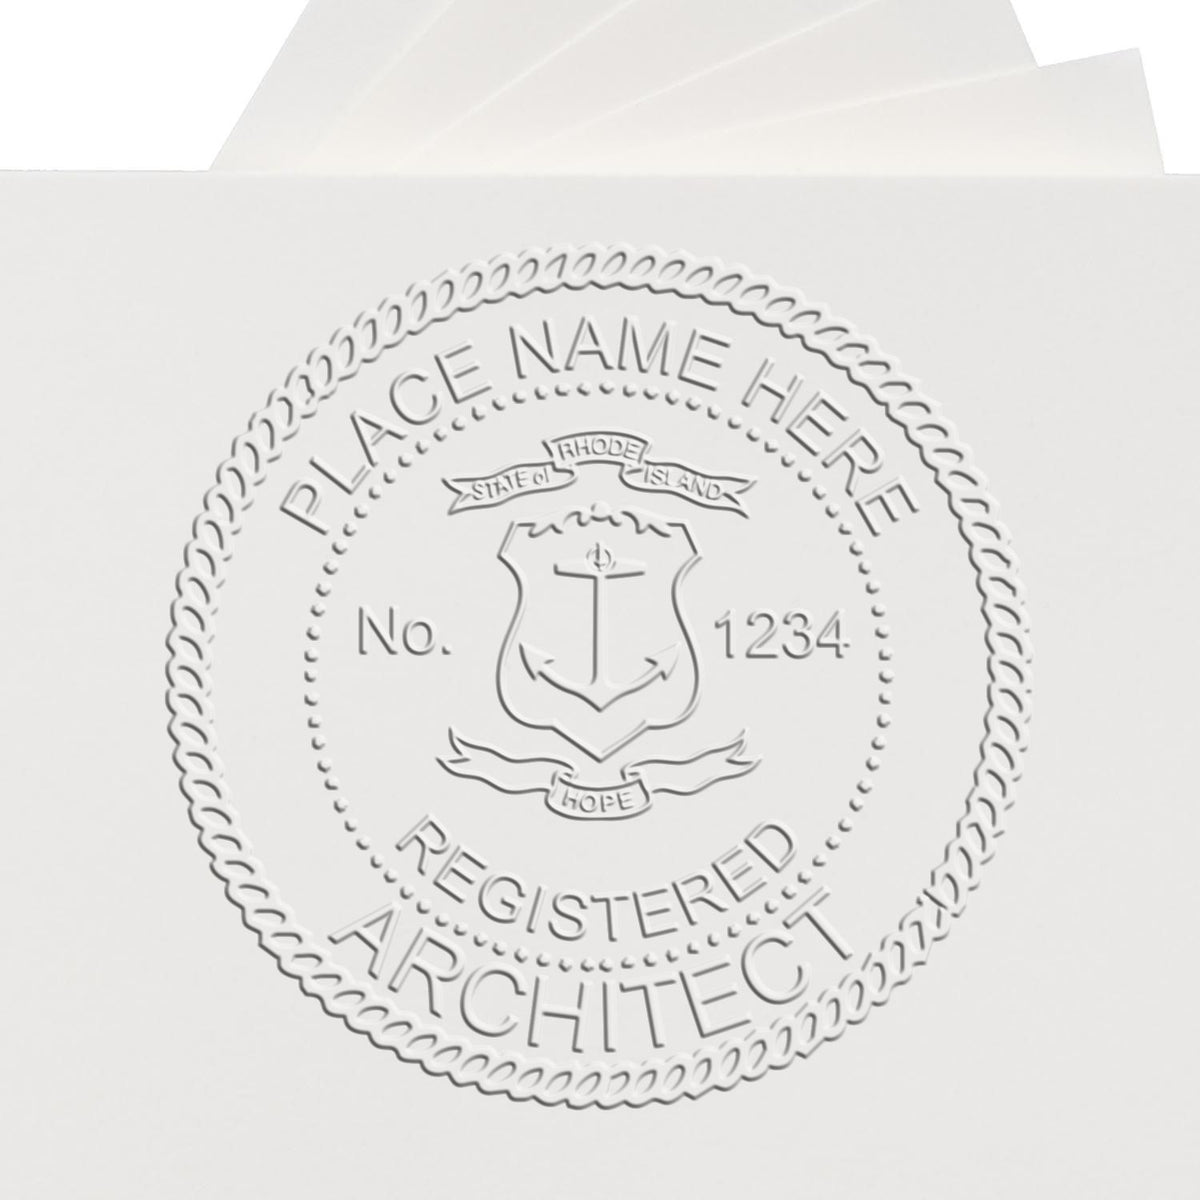 An alternative view of the State of Rhode Island Long Reach Architectural Embossing Seal stamped on a sheet of paper showing the image in use